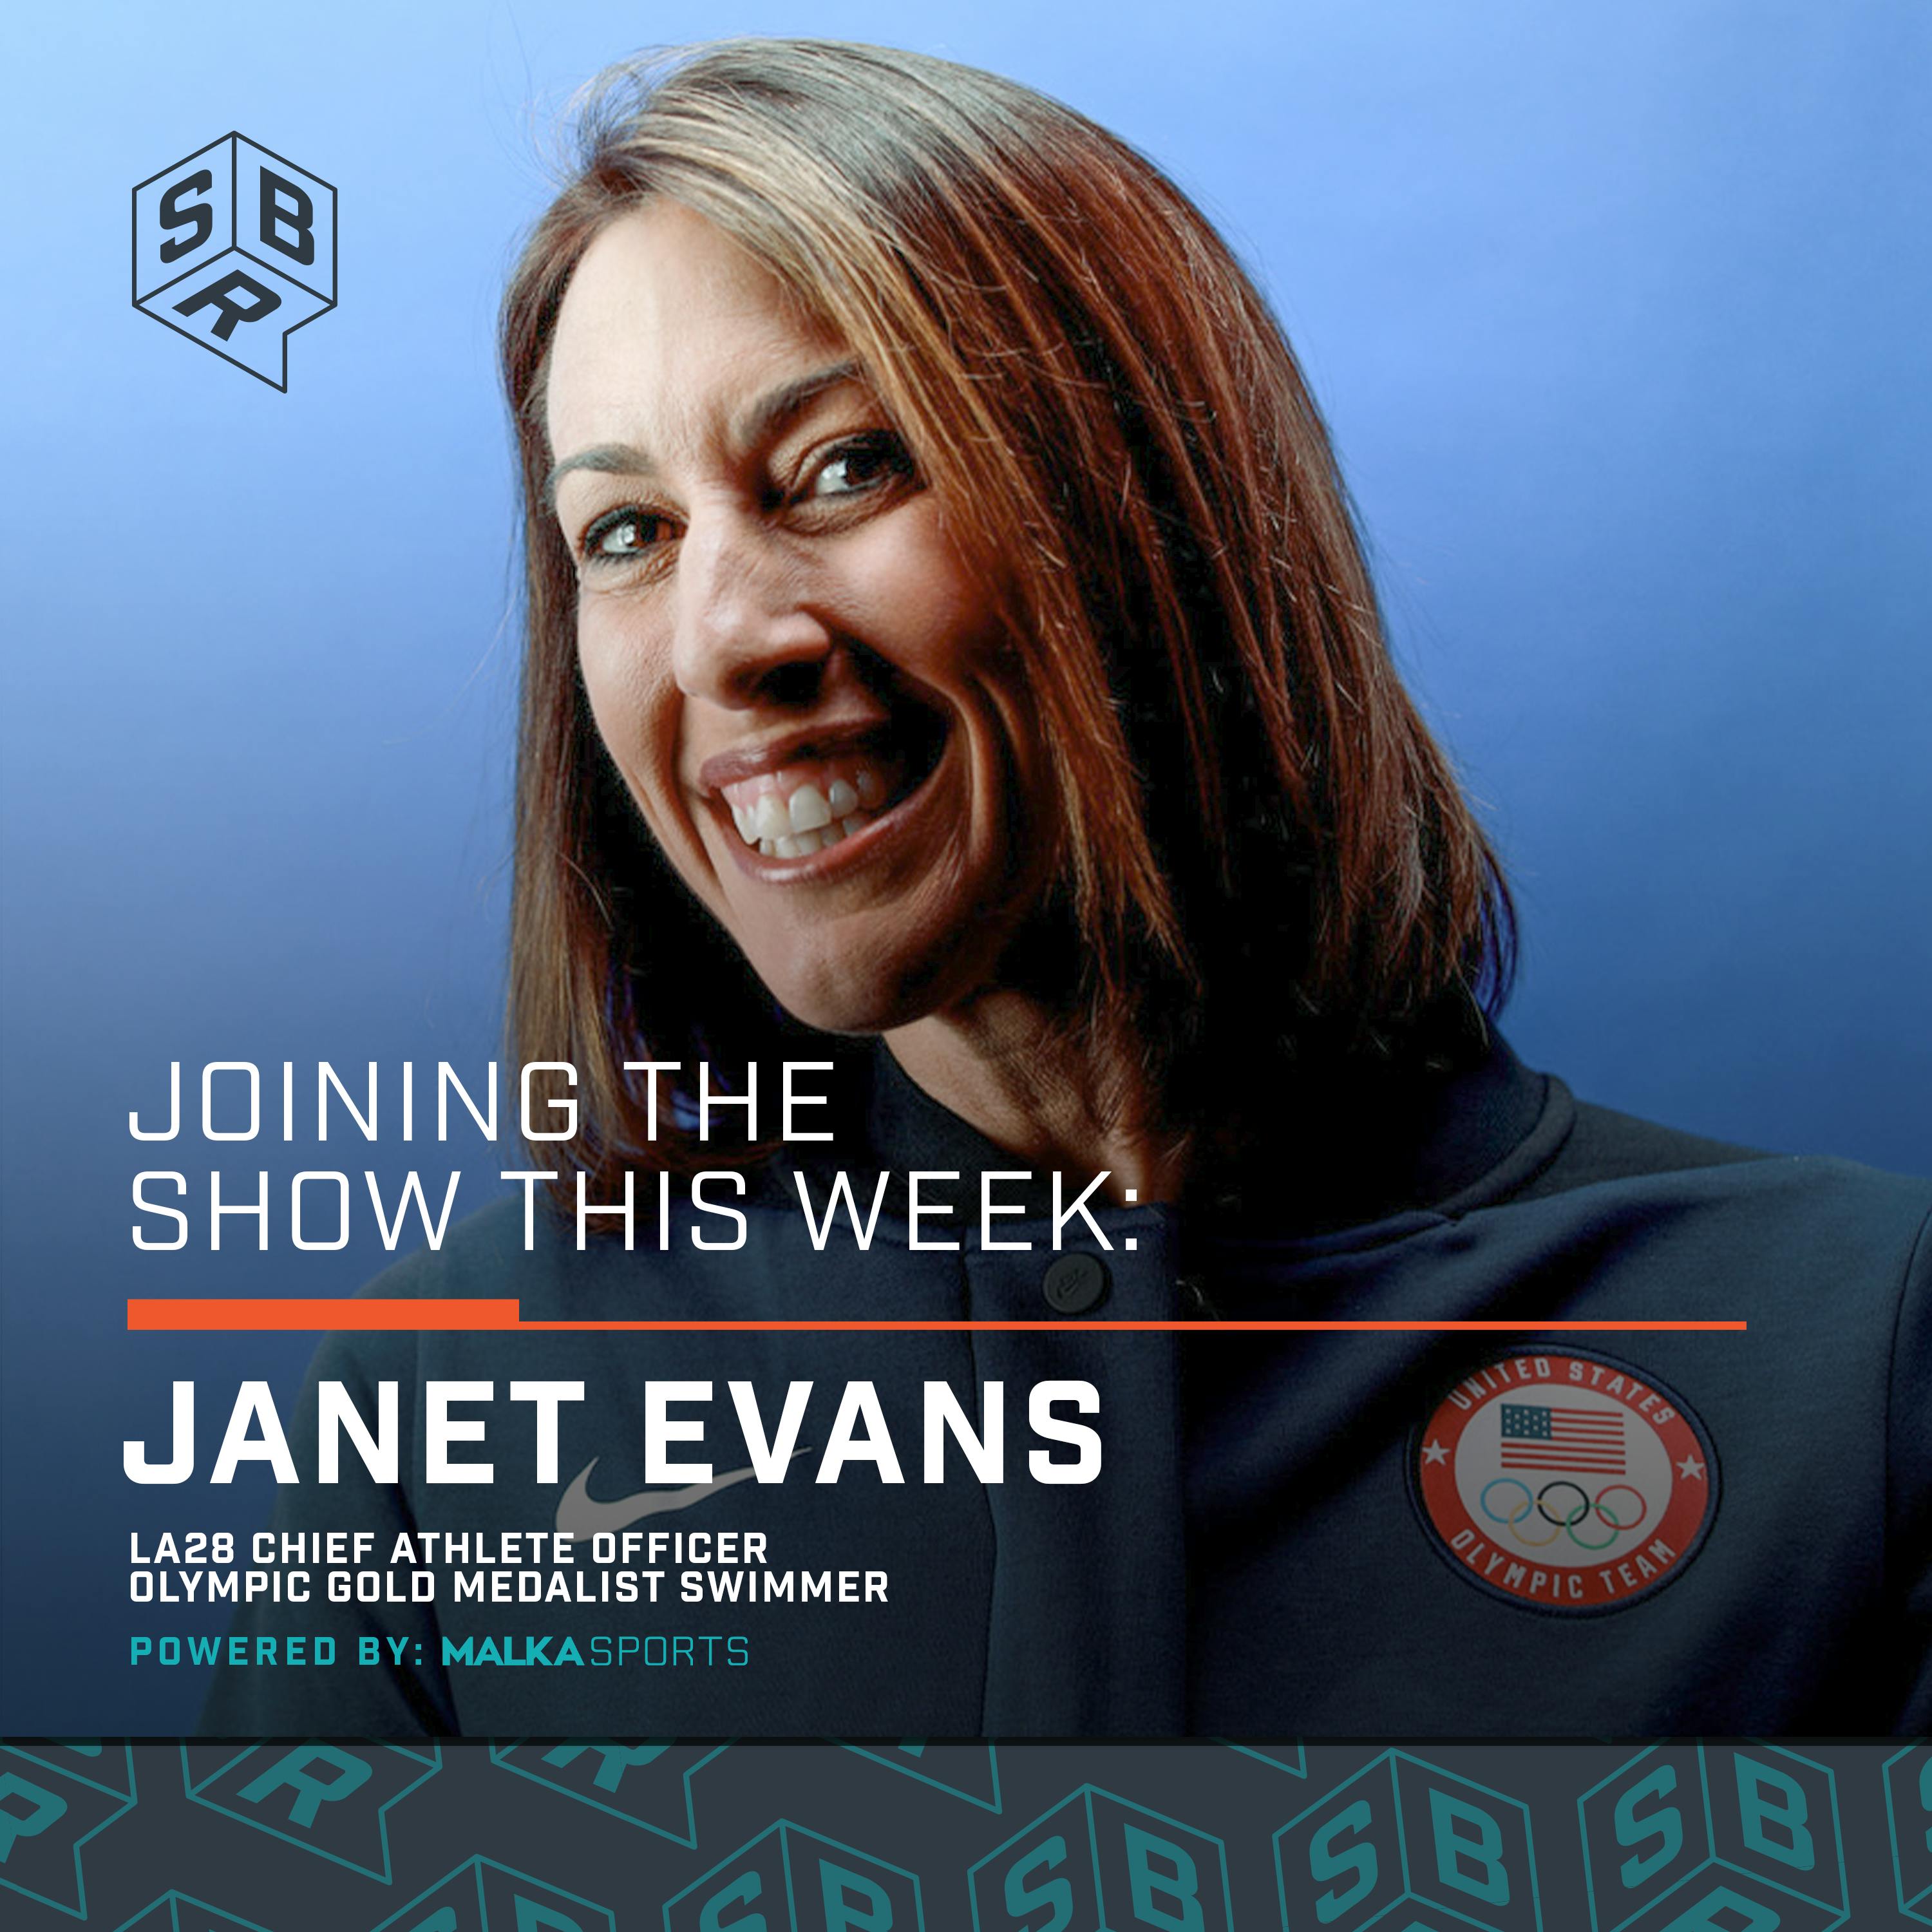 Janet Evans (@JanetEvans) - 4-Time Olympic Gold Medalist + LA28 Chief Athlete Officer